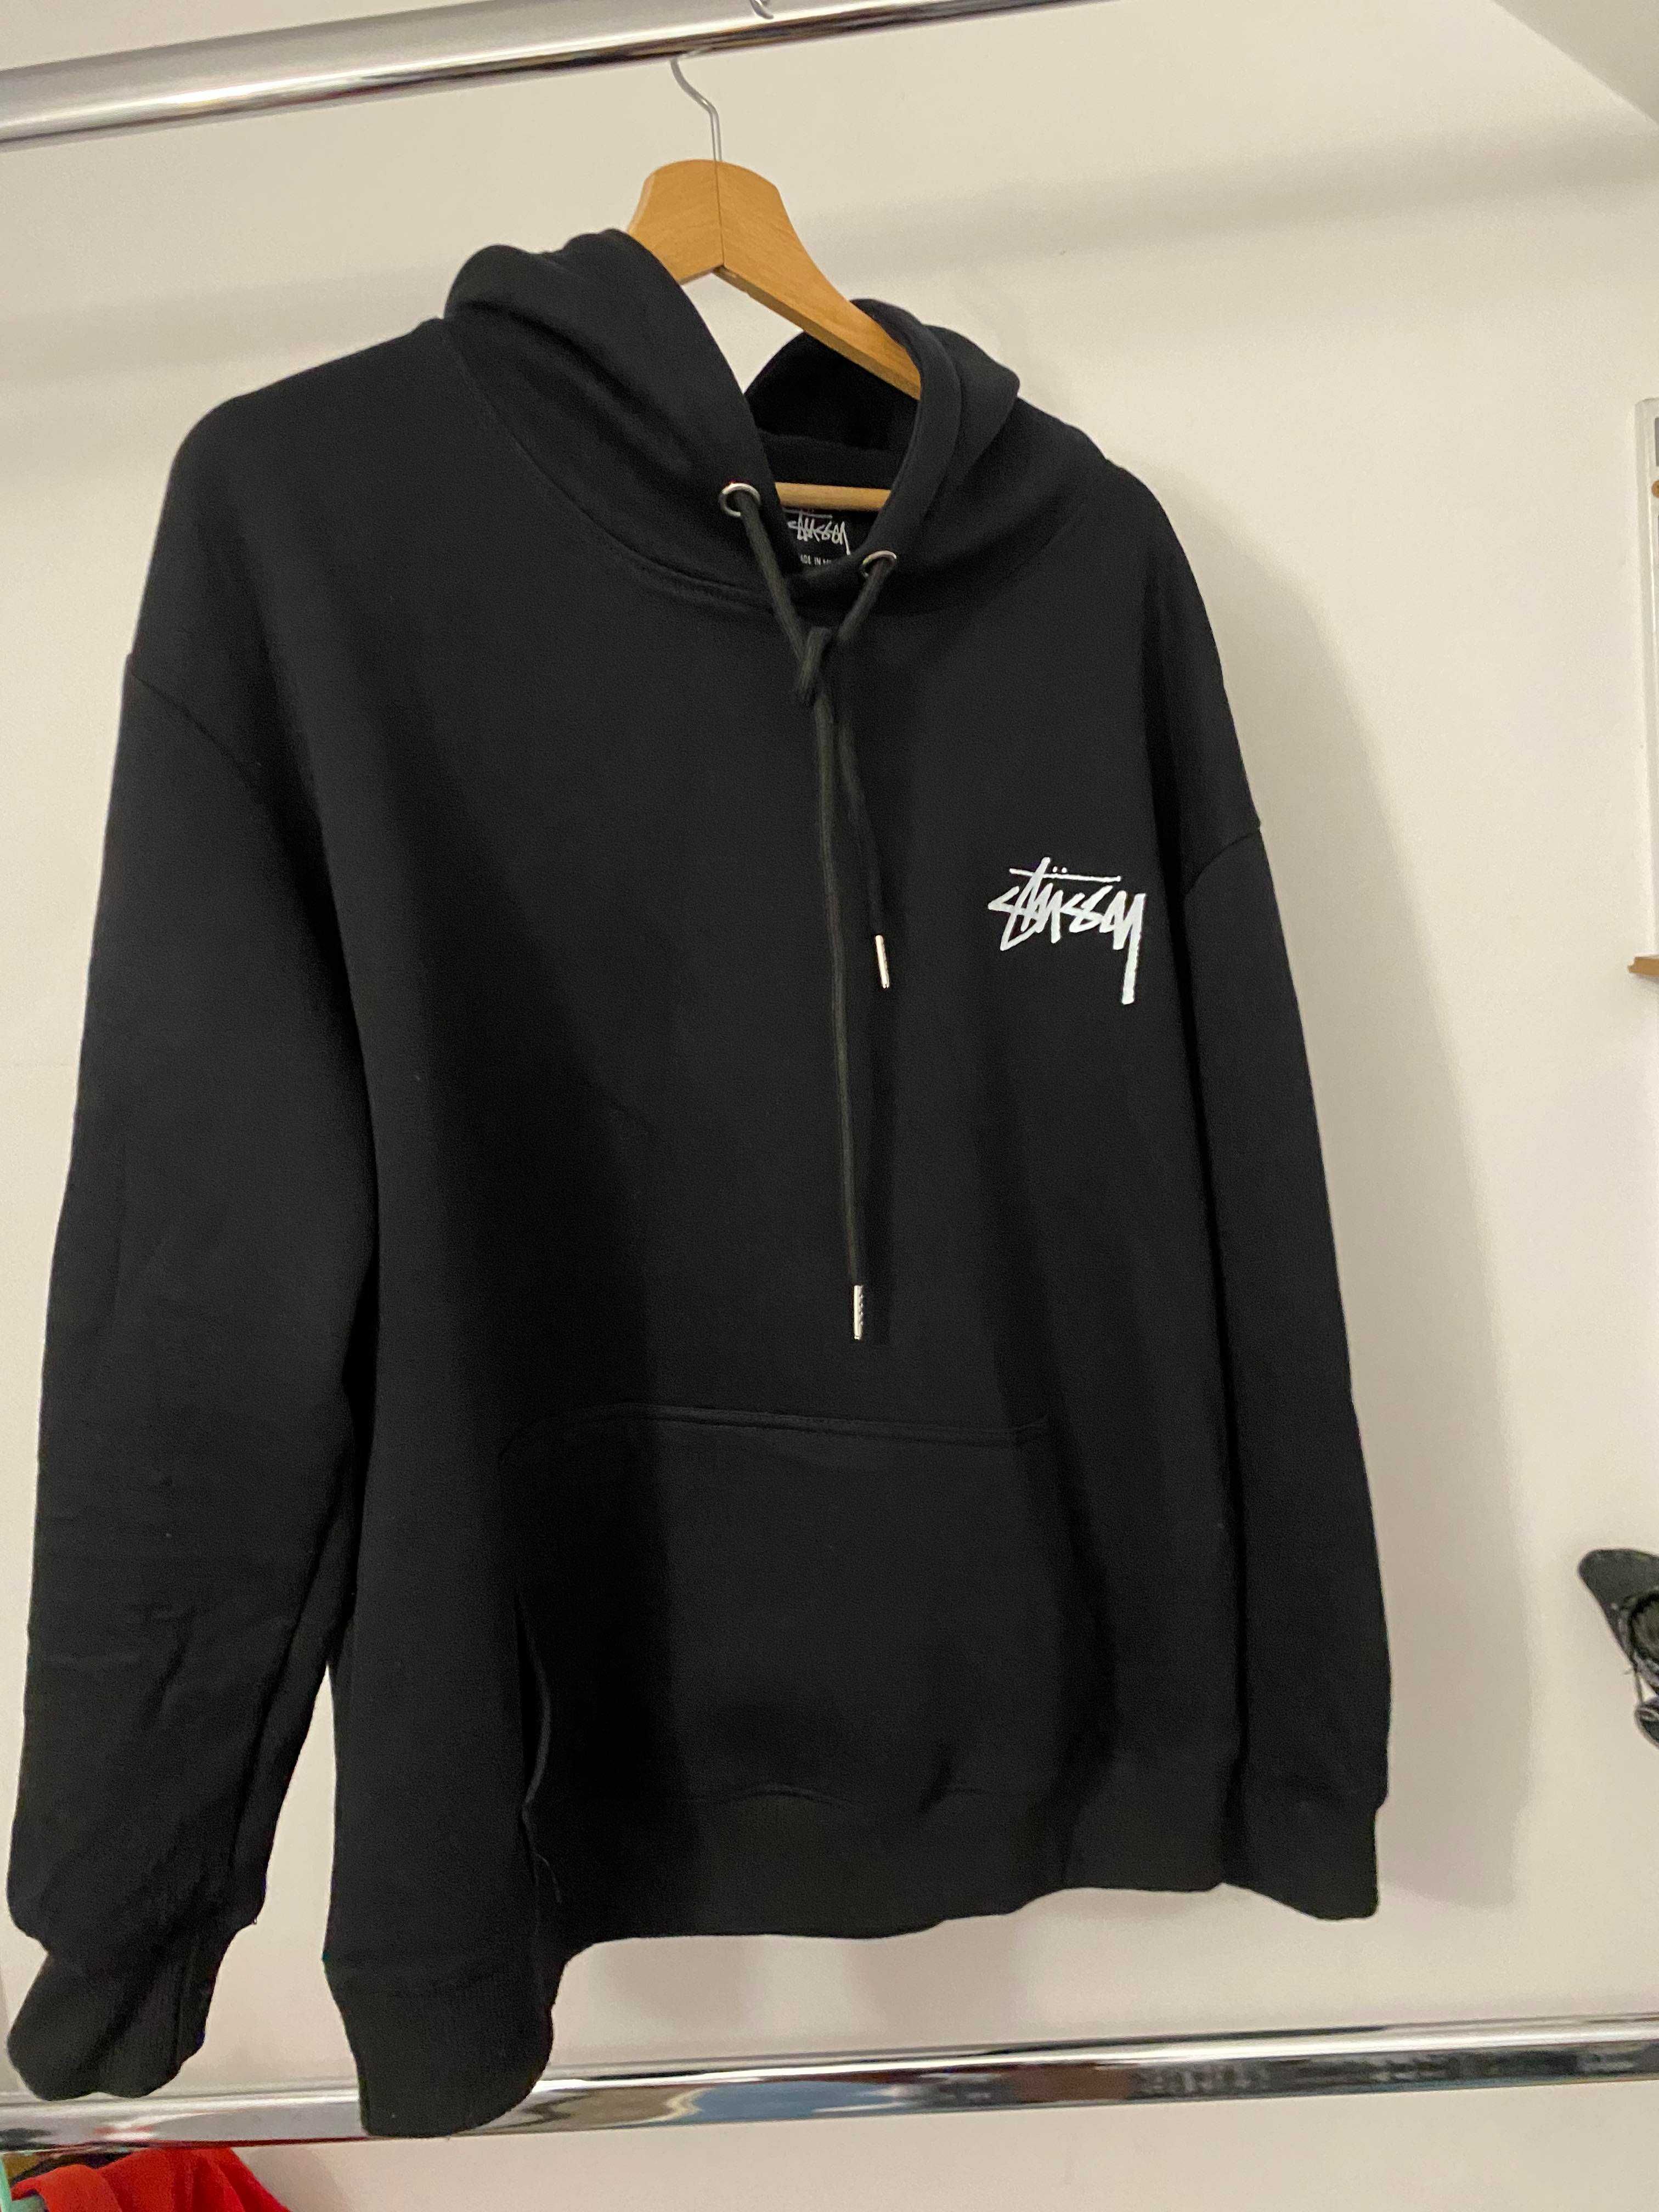 Hanorac Stussy (Supreme, Gucci, The north face, Nike, Versace, )